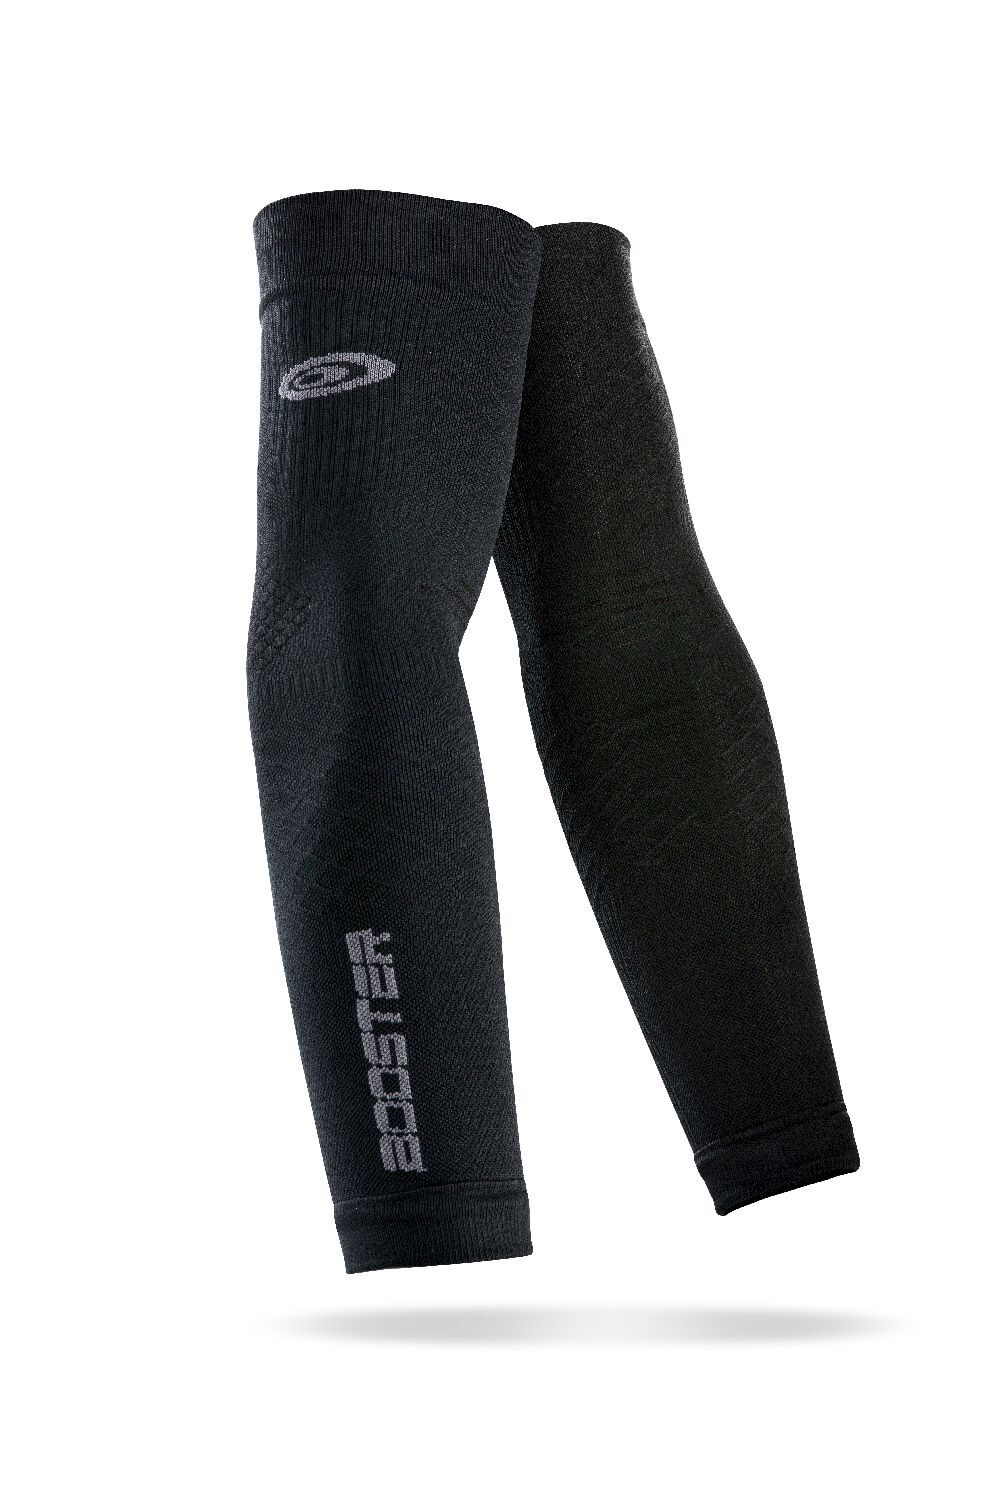 BV Sport Booster - Arm warmers